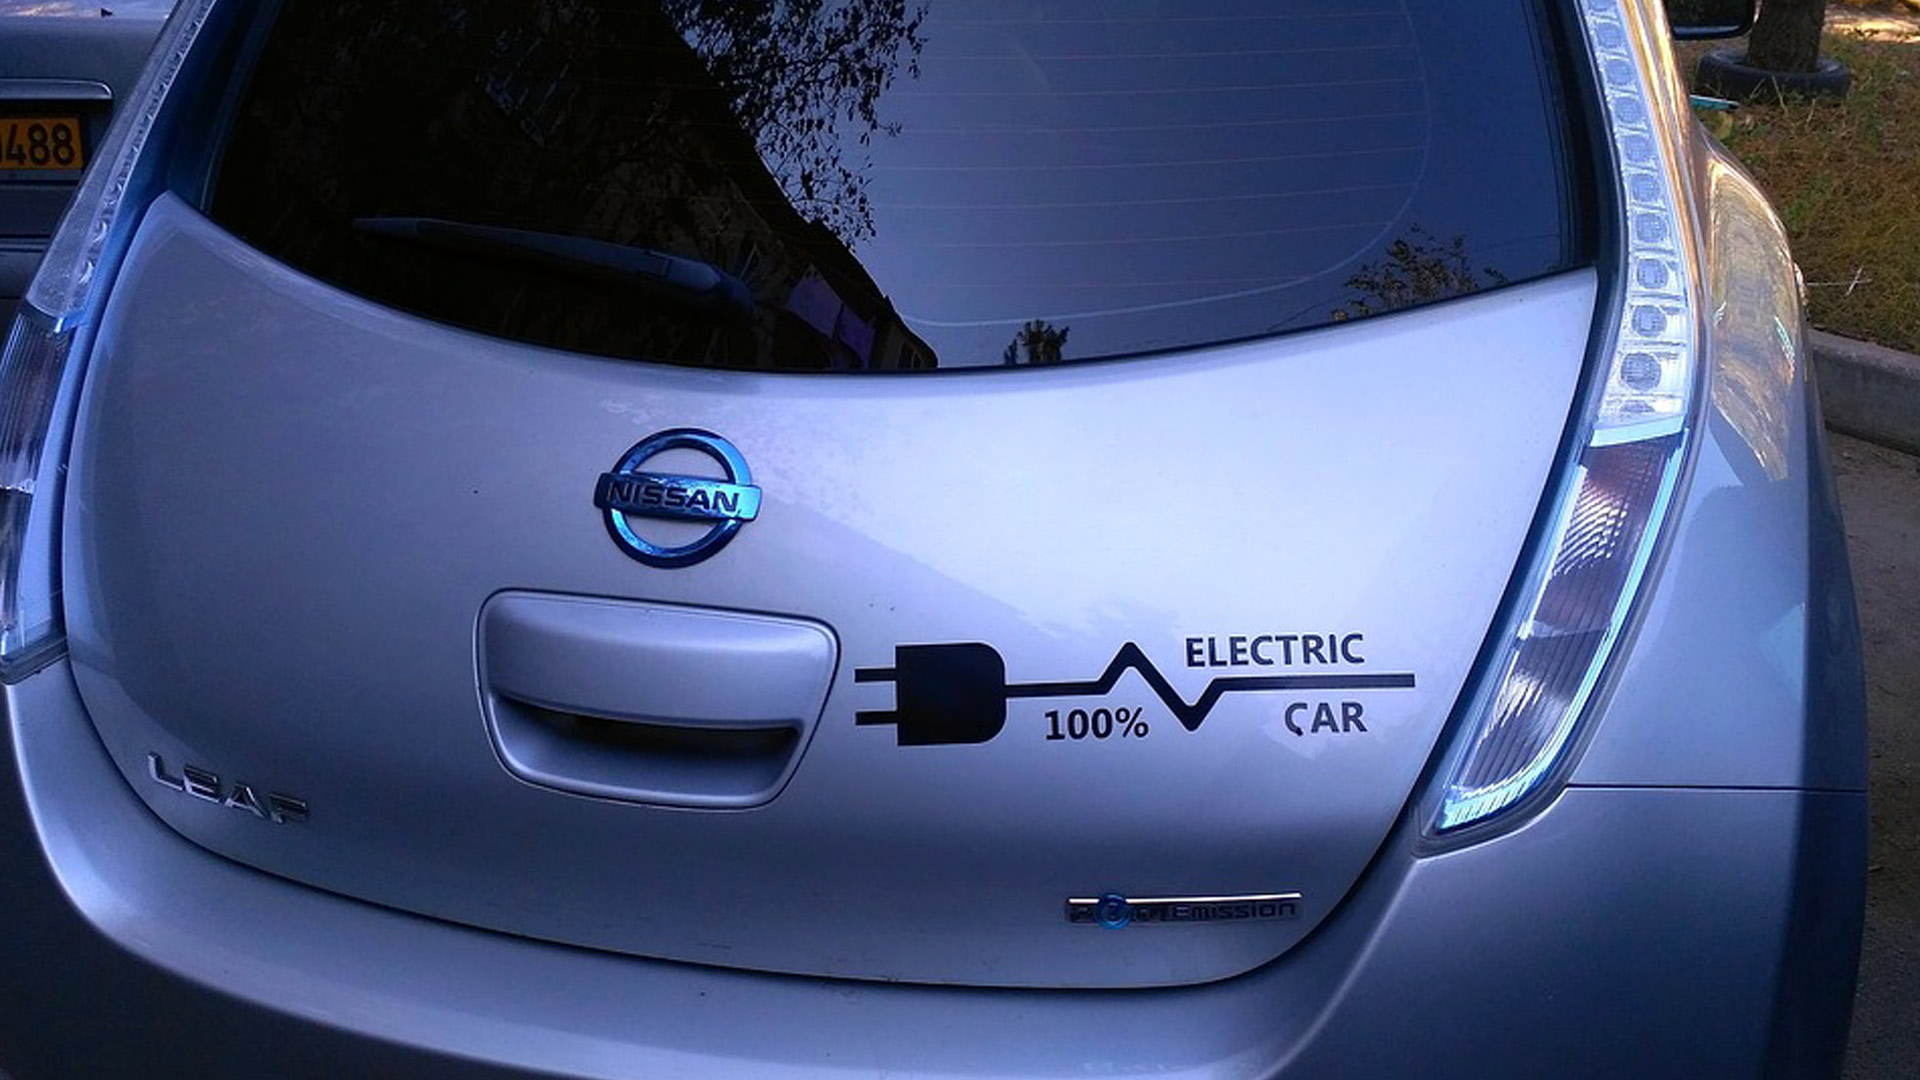 Self-Driving Nissan Leaf - MAT Foundry Group